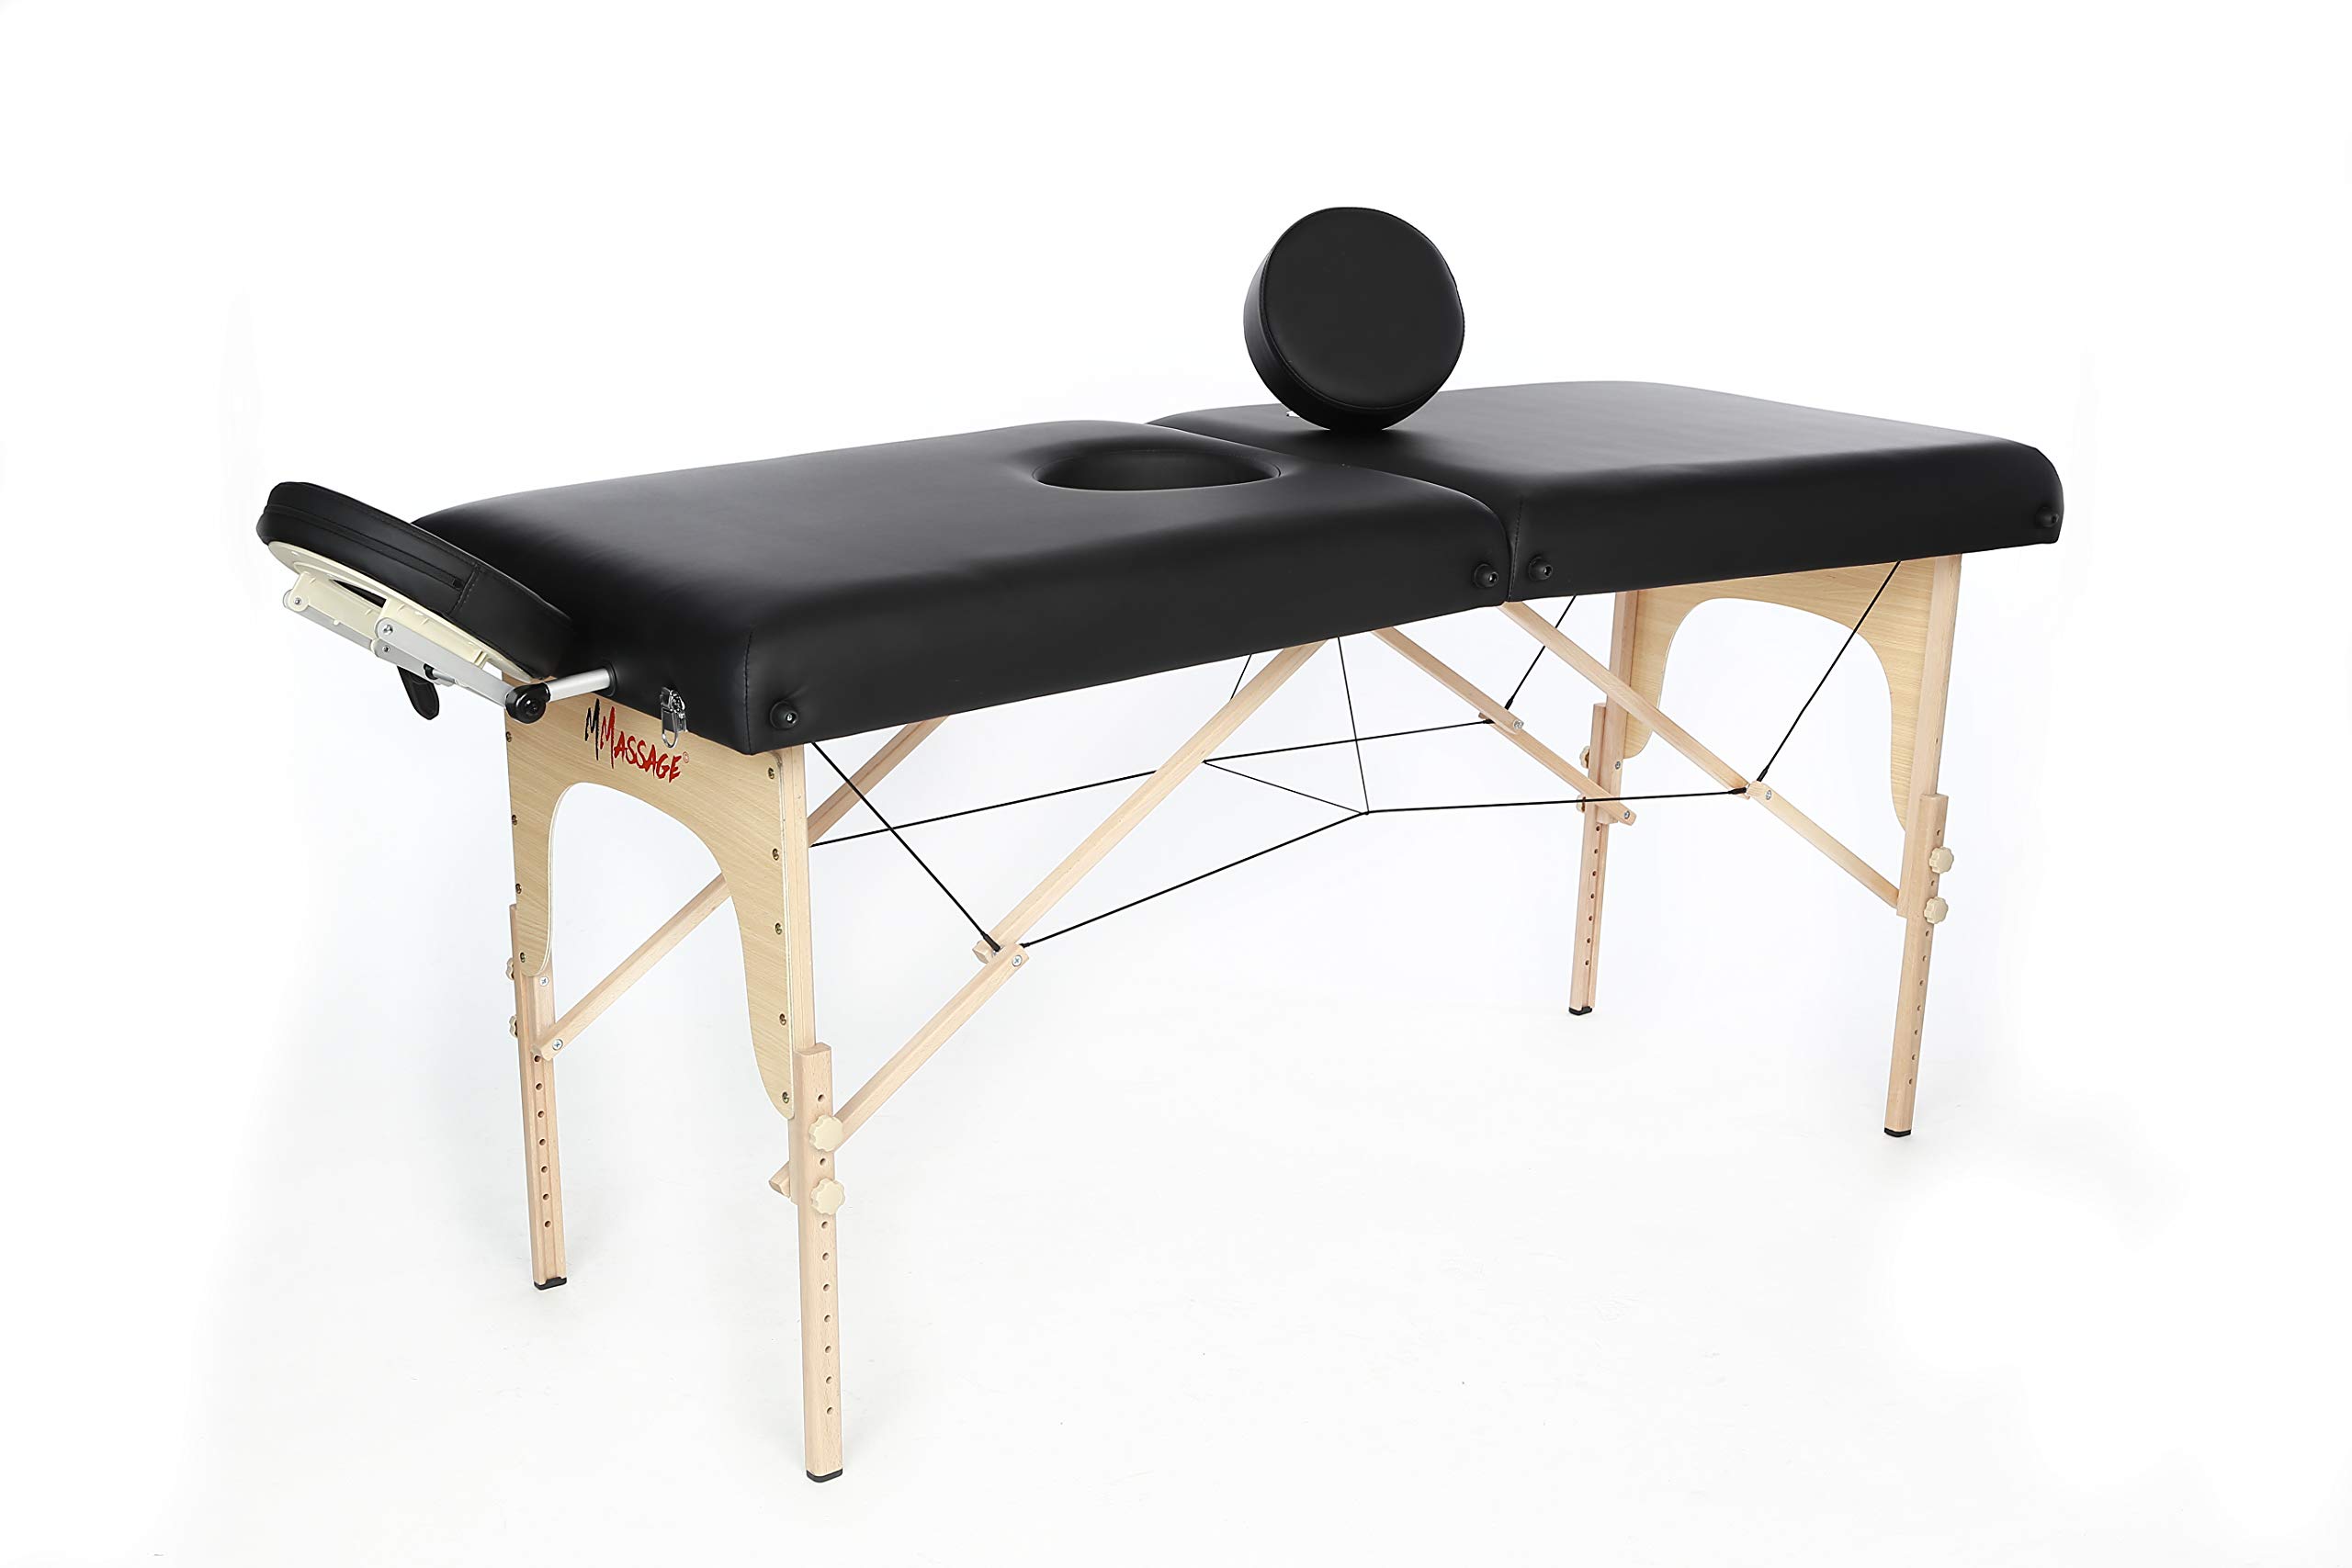 ayoola popoola recommends milking table for sale pic